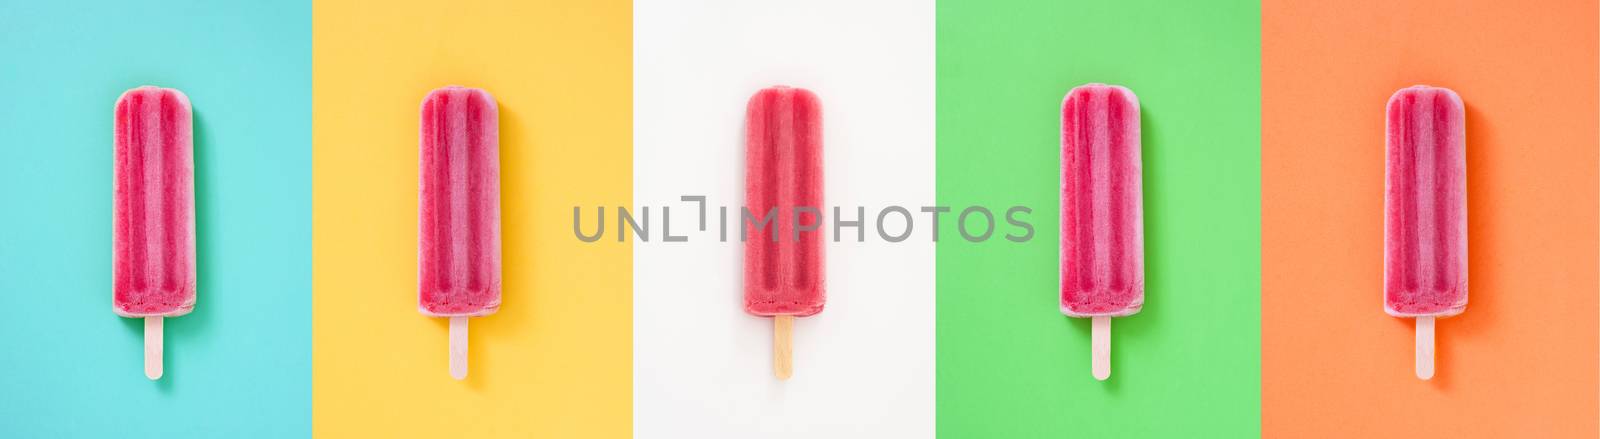 Strawberry popsicle collage on different colorful backgrounds